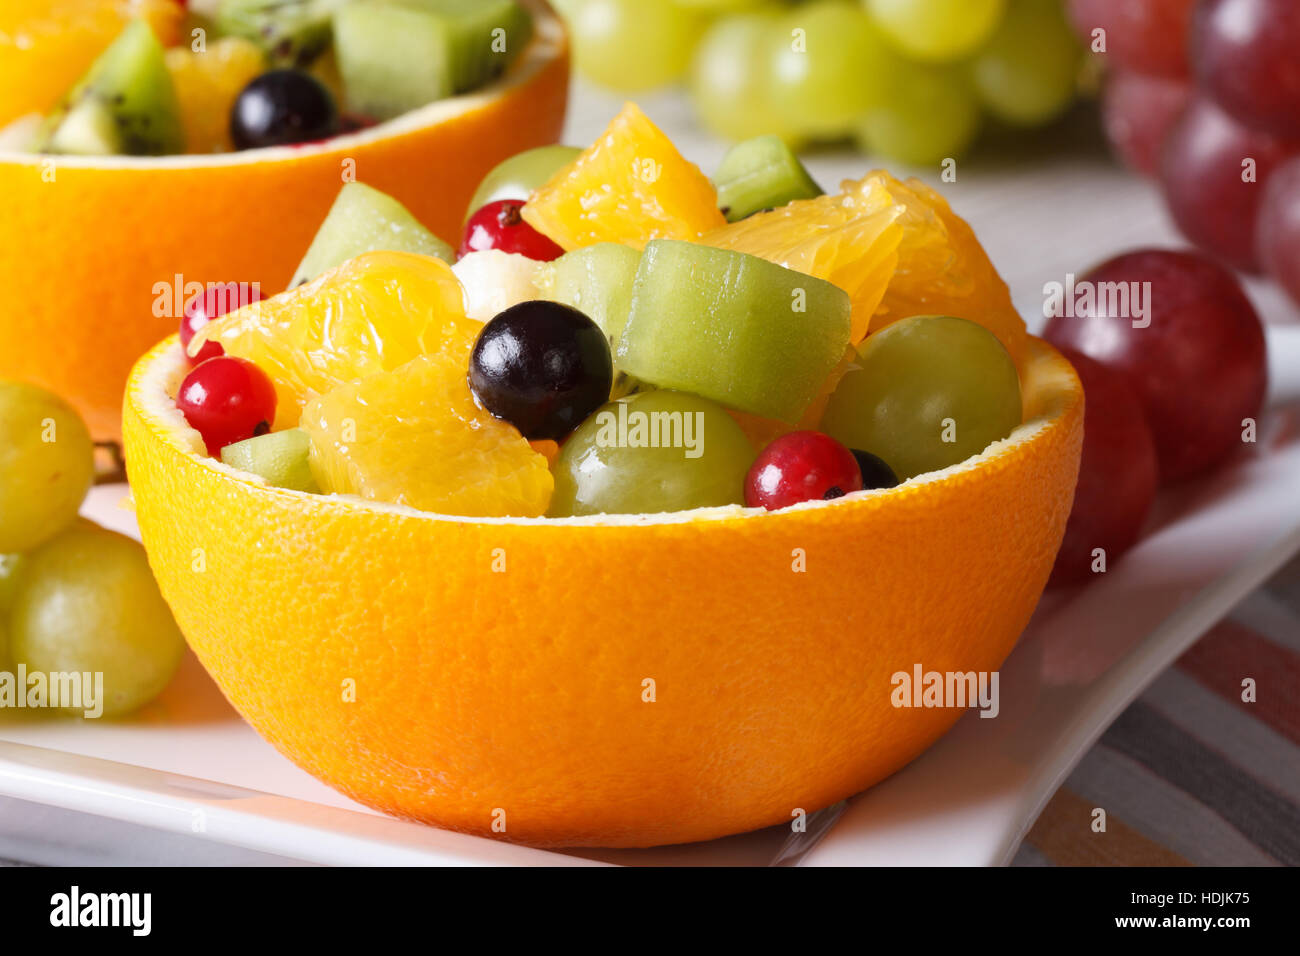 Hollowed-out oranges filled with fruit close-up on a plate. horizontal Stock Photo